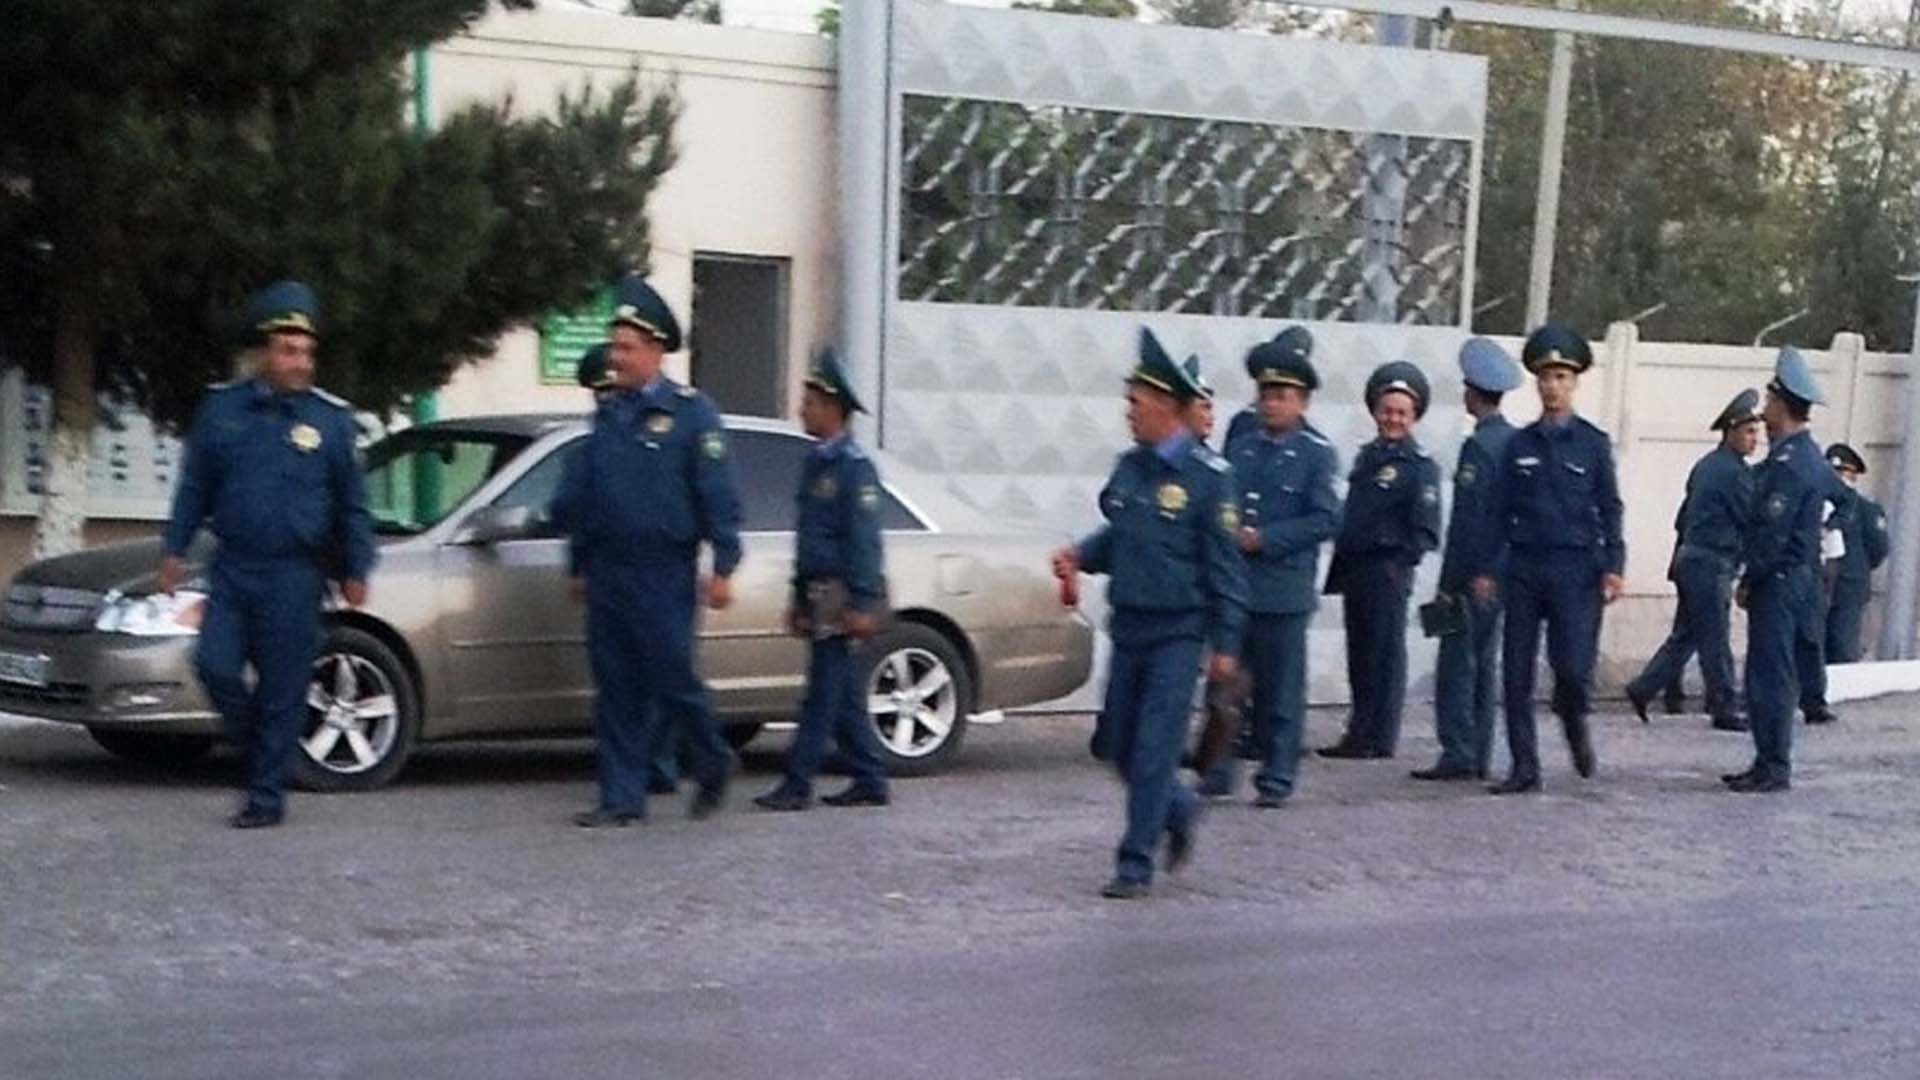 “Disgracing the country”: Ashgabat police raid against queue of people for subsidized bread